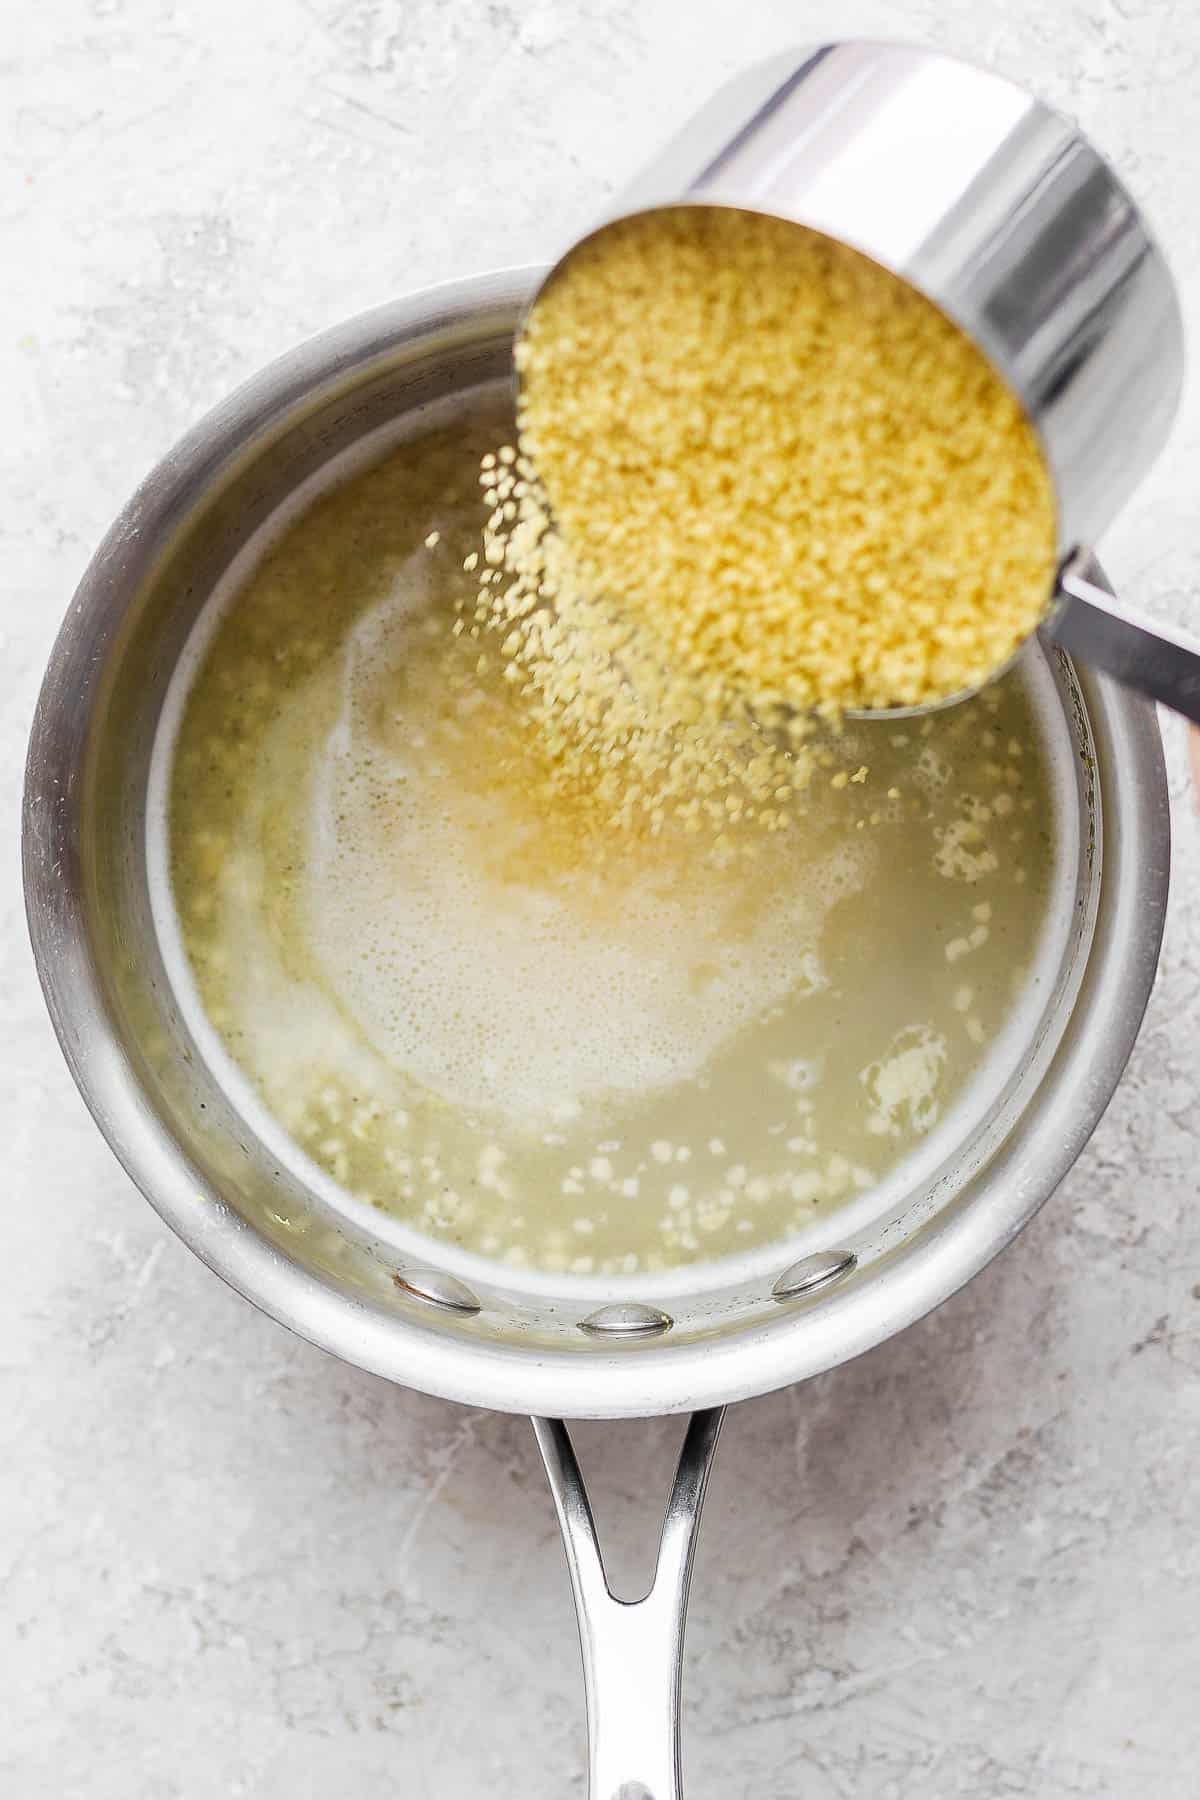 A cup of raw couscous being poured into the water mixture in the sauce pan.